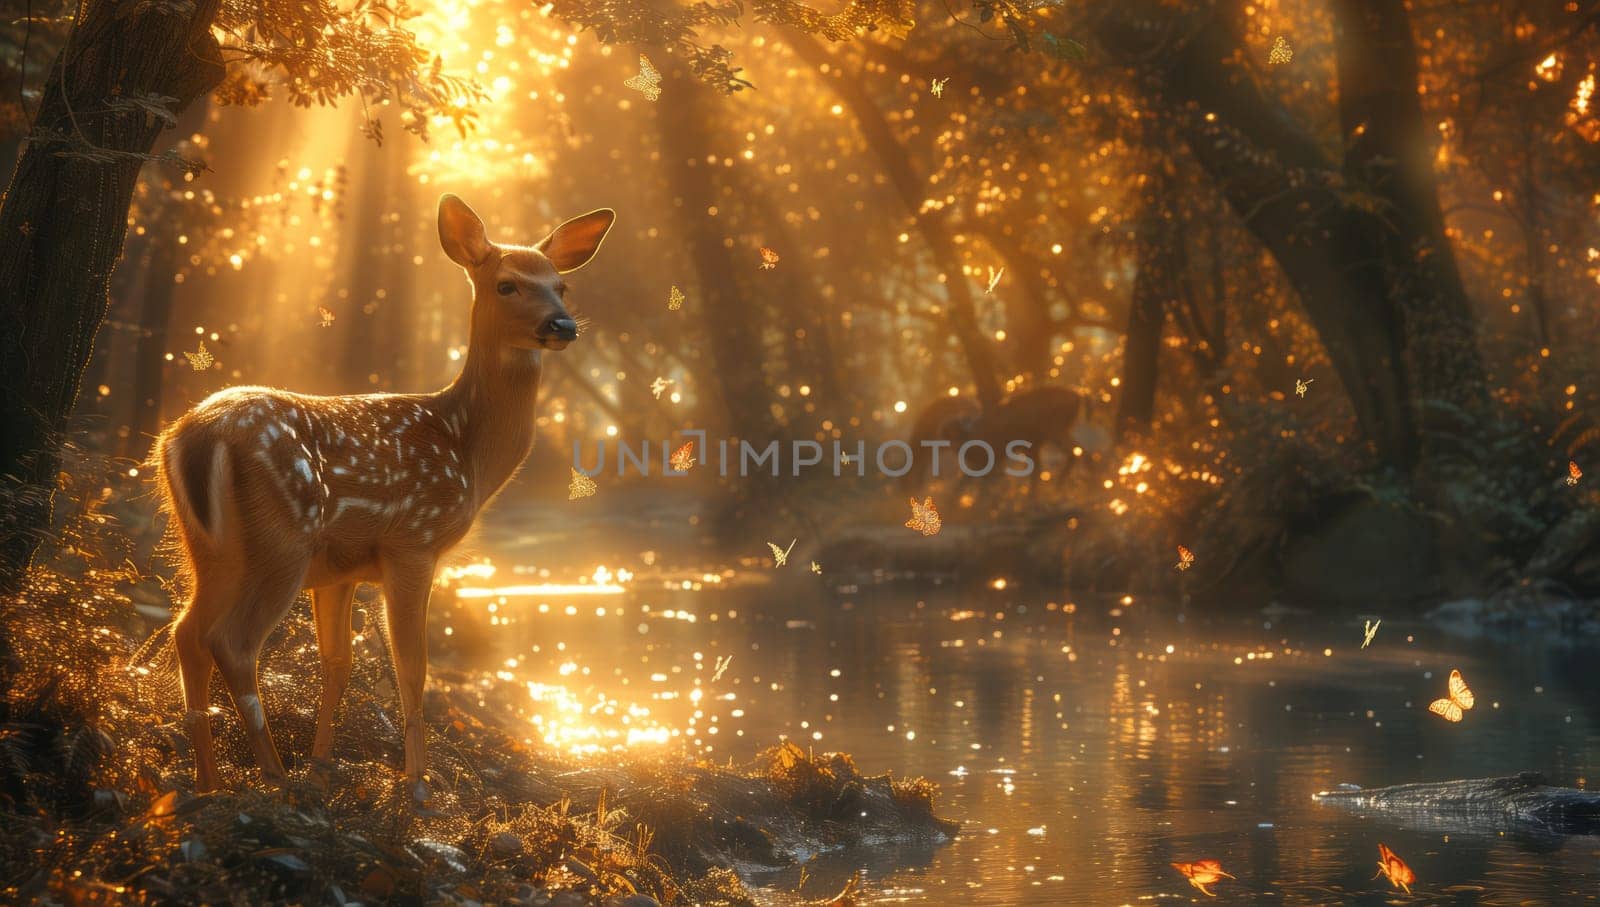 A deer gracefully poses next to a river in the enchanting woods, creating a picturesque scene like a painting of natural beauty